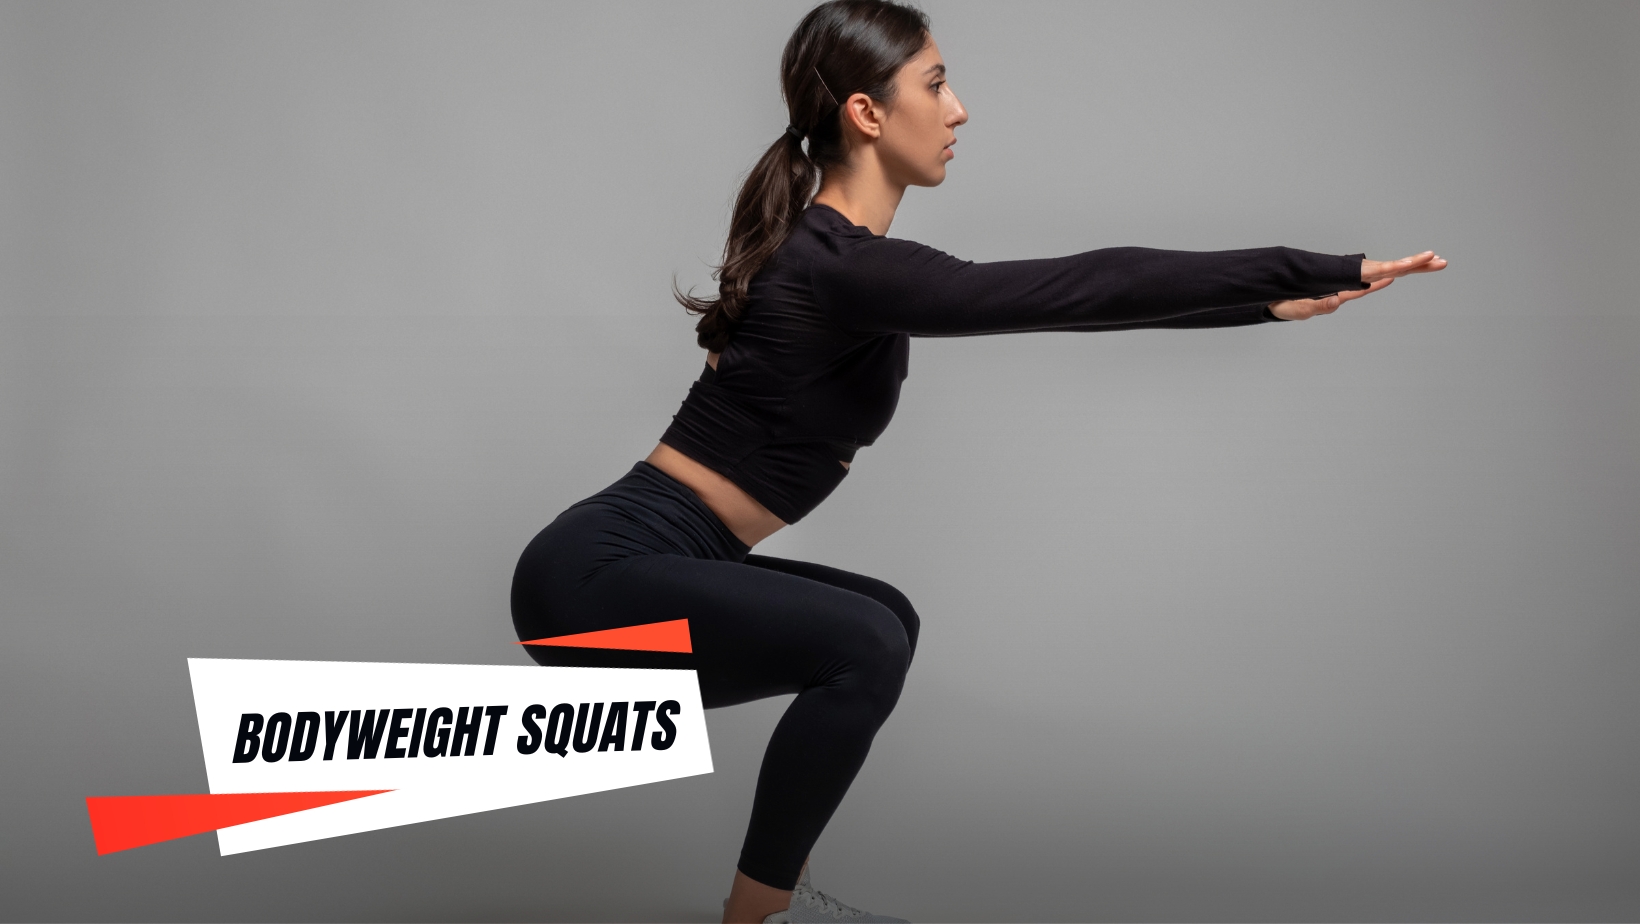 Bodyweight Squats for strength training